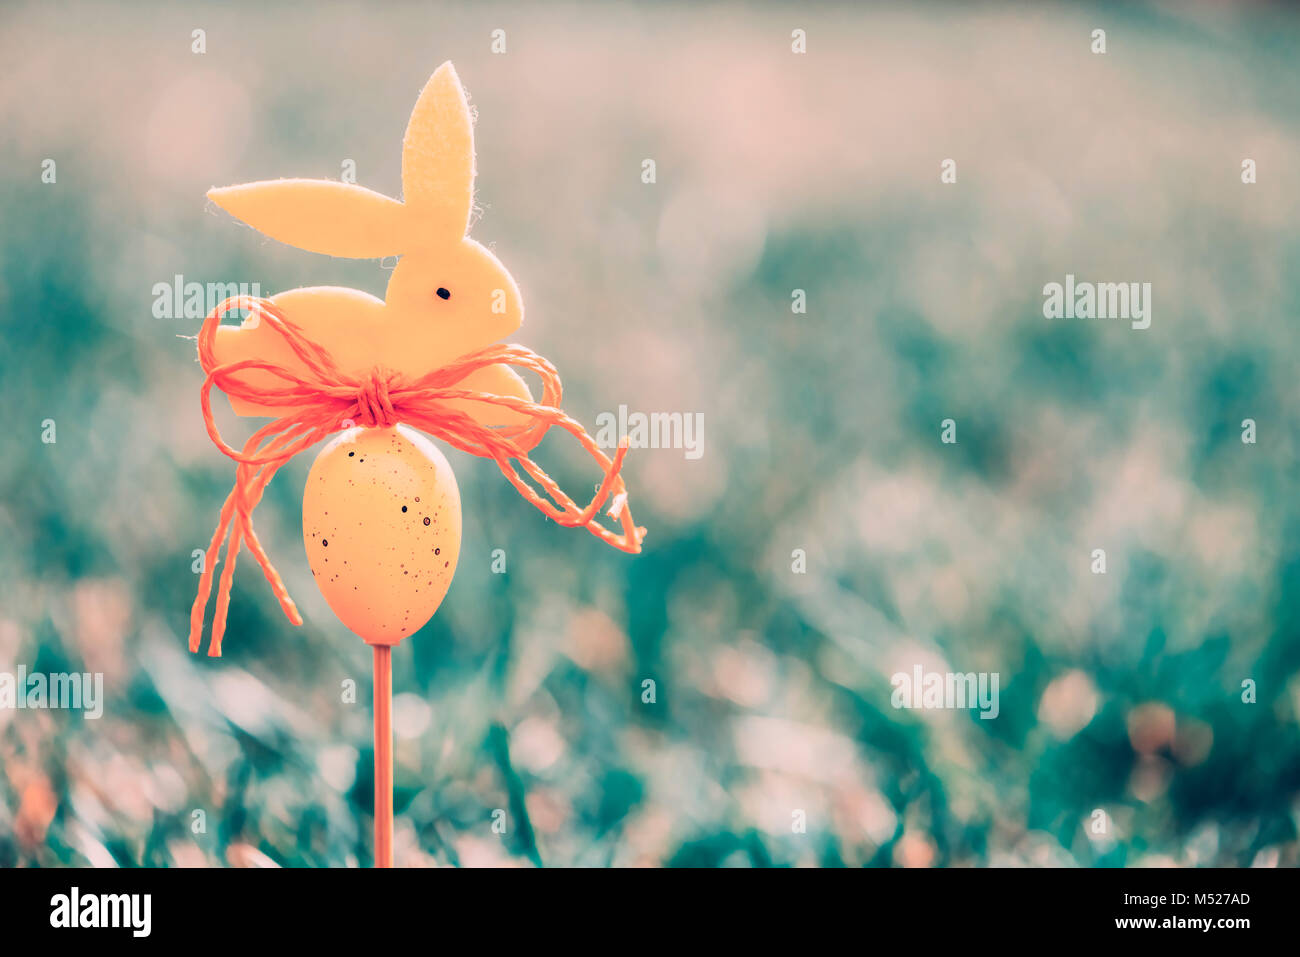 Easter background concept with yellow bunny figure Stock Photo